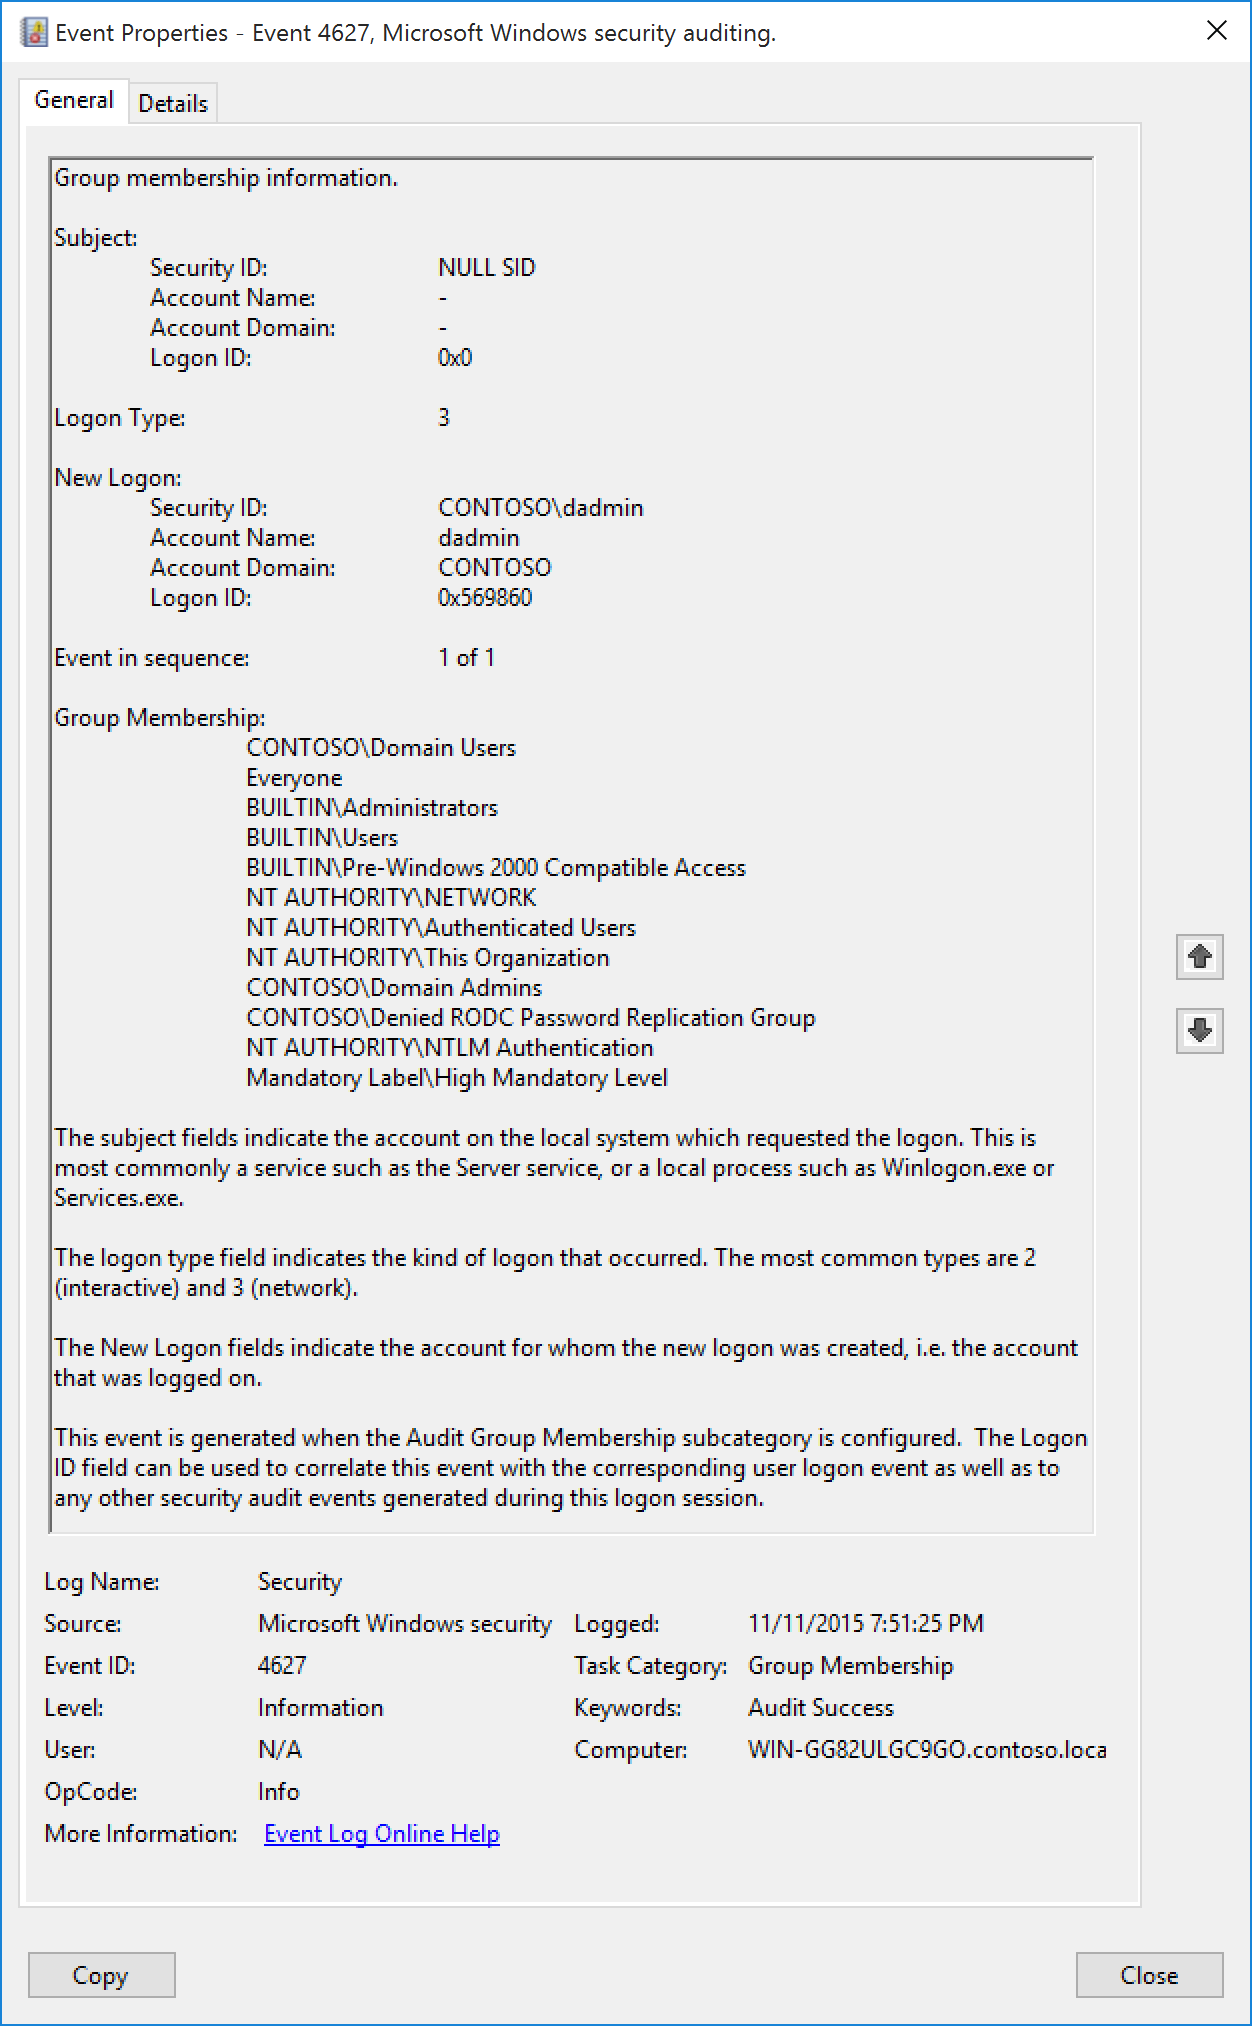 Image 7 is a screenshot of Windows Event 4627. The window title is "Event Properties - Event 4627, Microsoft Windows security auditing." 